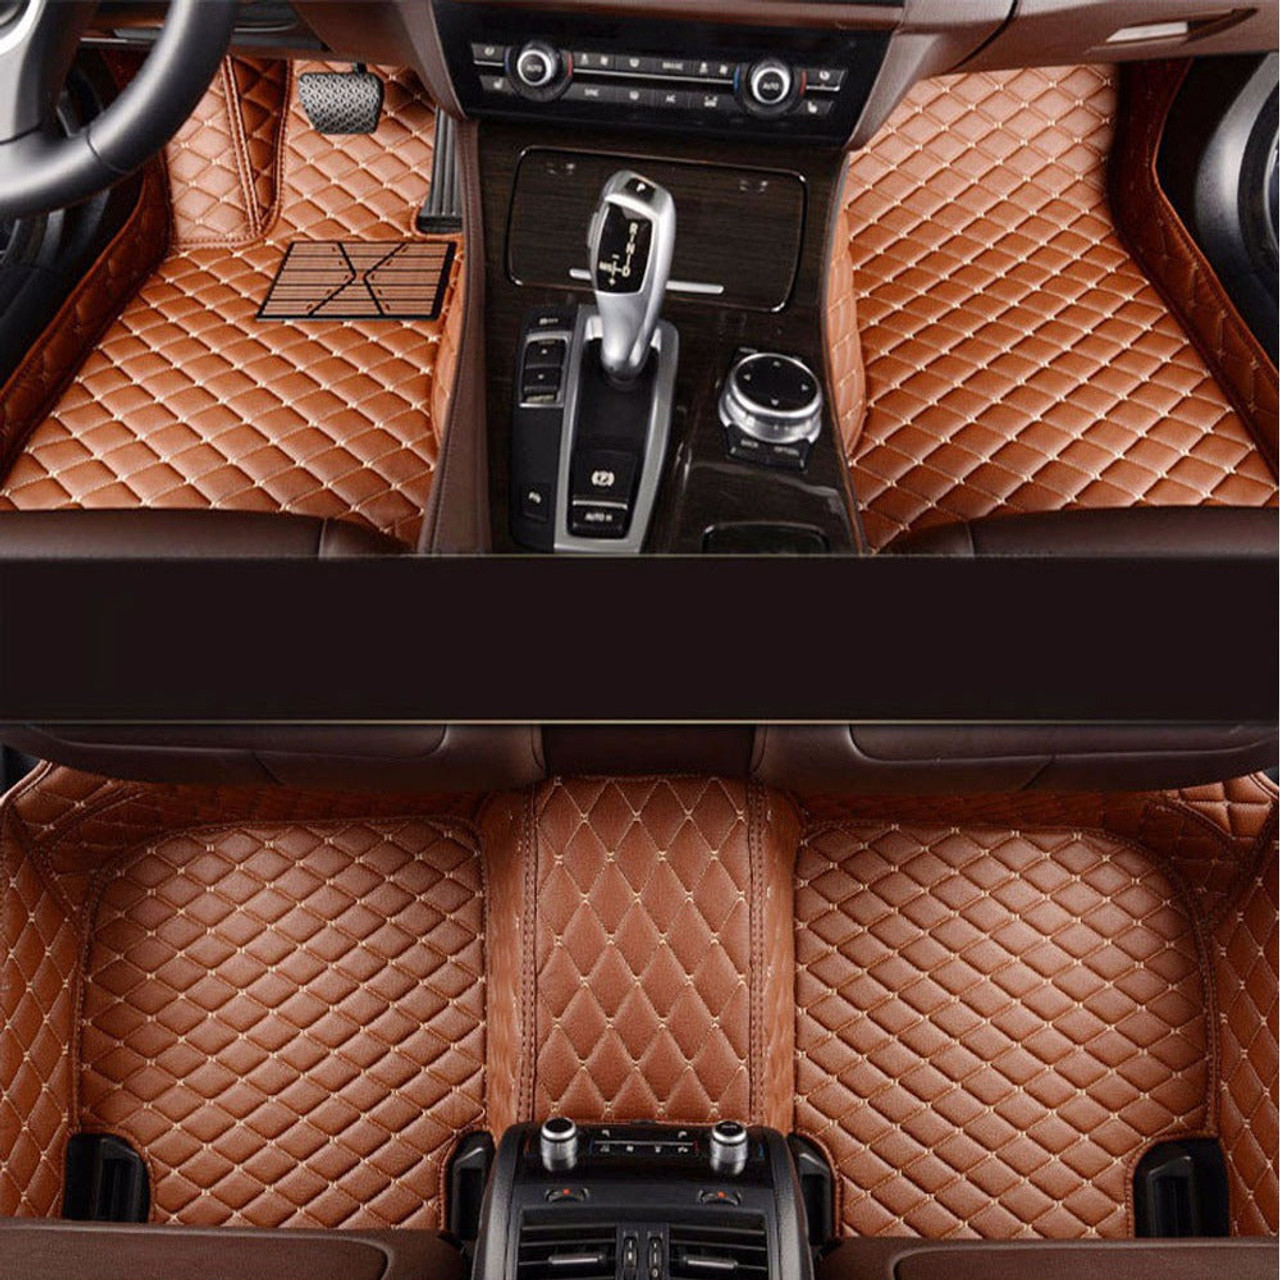 https://cdn11.bigcommerce.com/s-ktdamhfv2f/images/stencil/1280x1280/products/9289/40894/lincoln-leather-car-floor-mats-brown-37193249915133__00476.1673593774.jpg?c=1